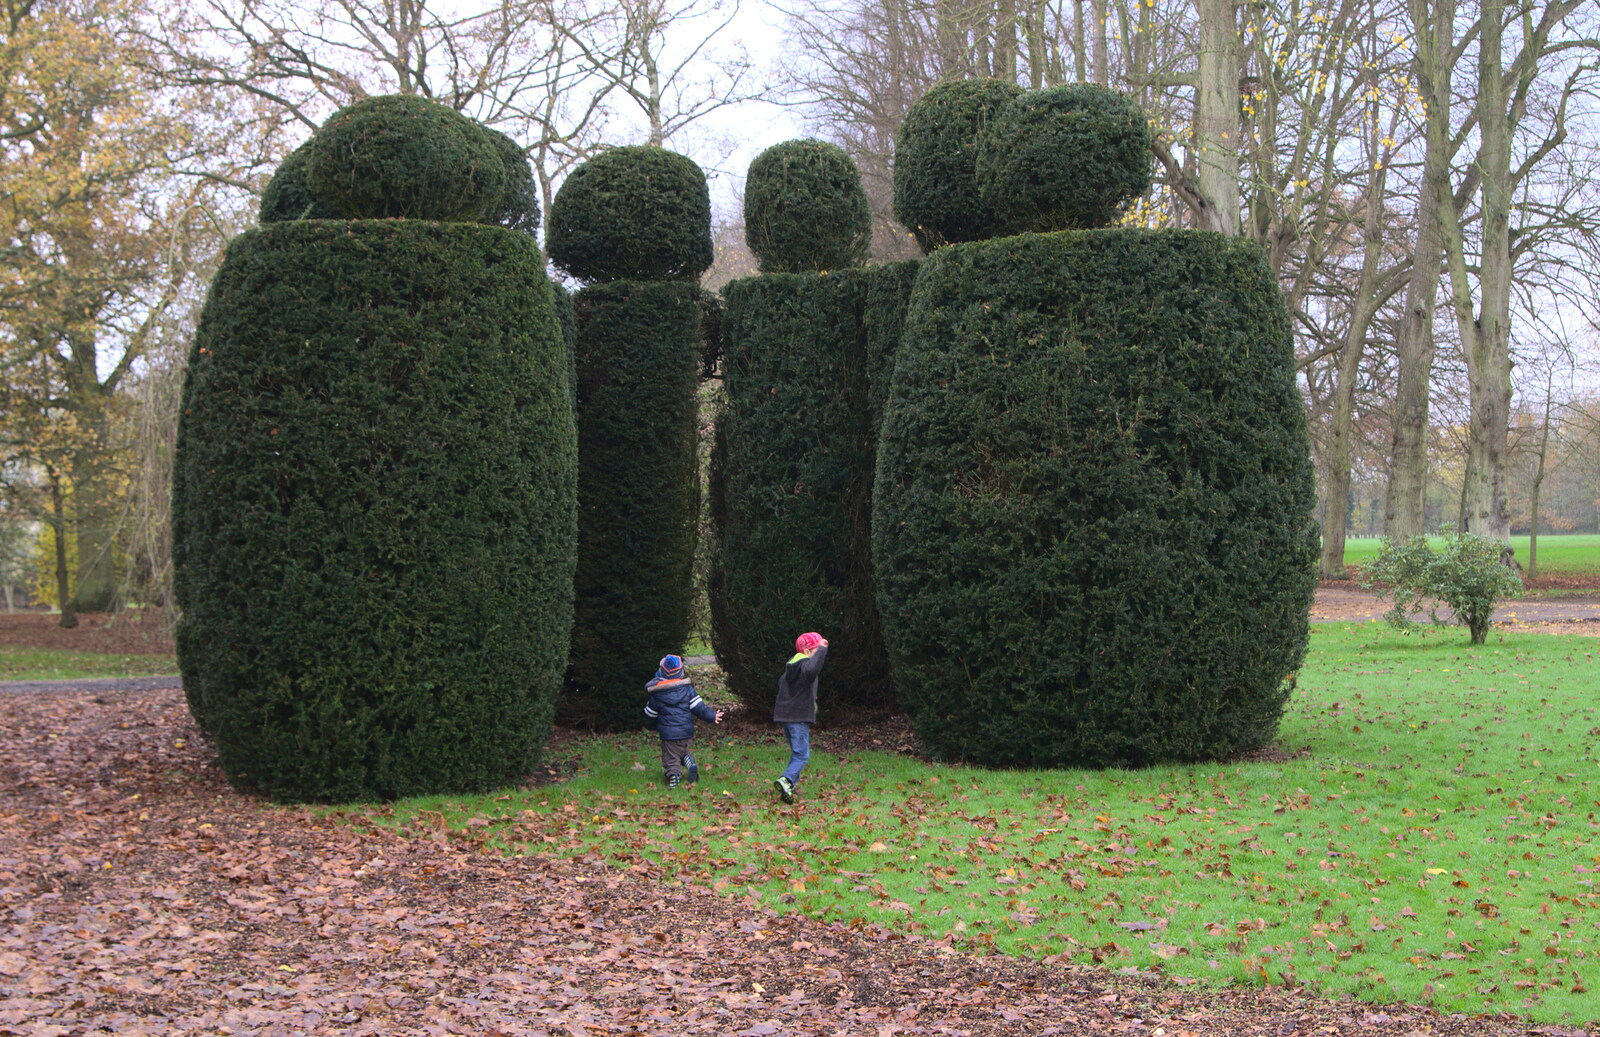 The boys run around the topiary from The Lorry-Eating Pavement of Diss, Norfolk - 3rd December